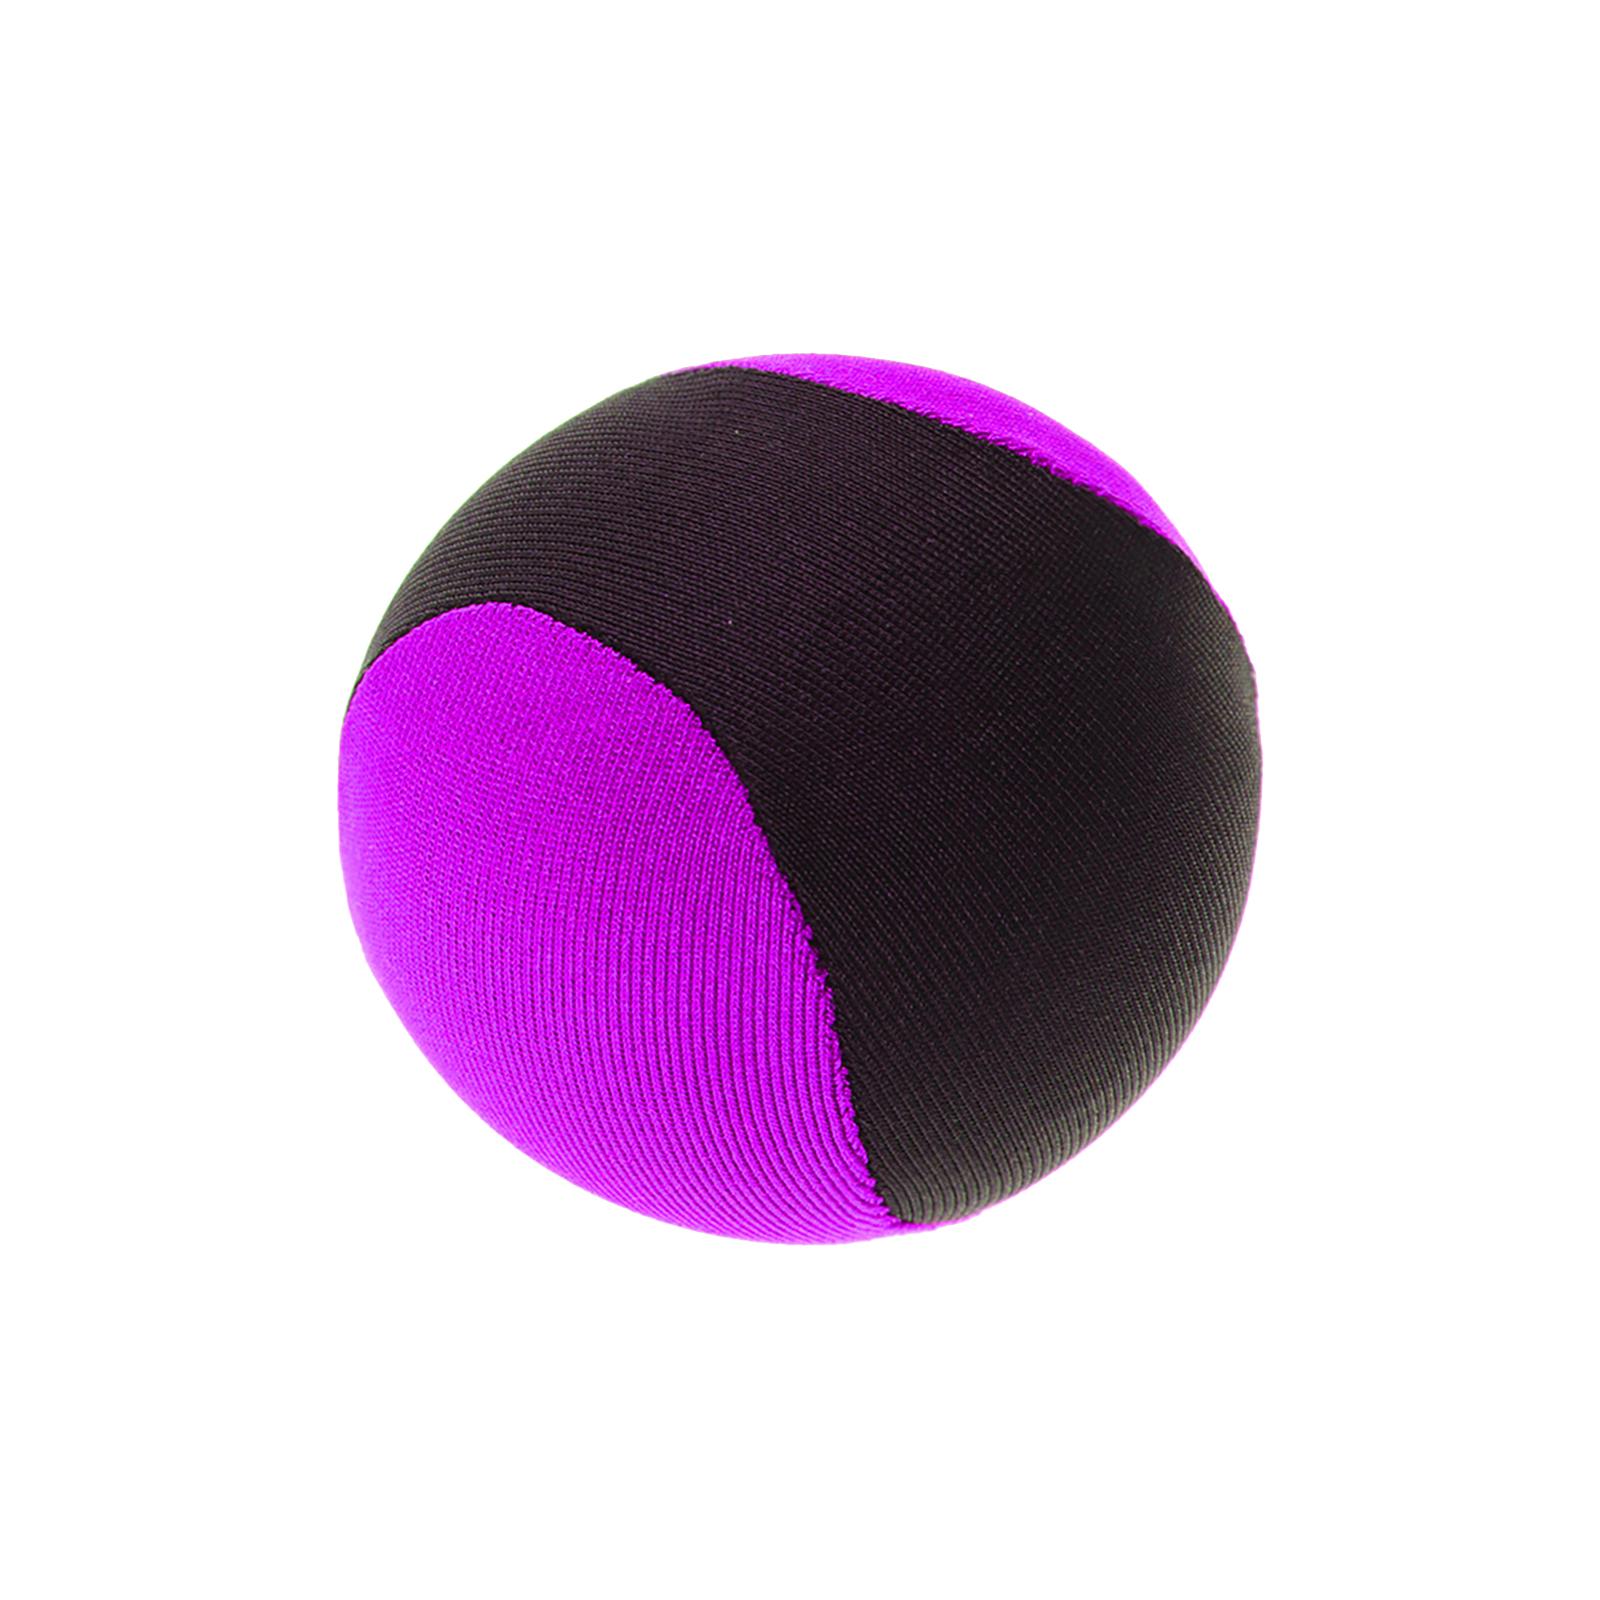 Bouncing Ball Sensory Toy Soft Relax Skipping Ball for Games Holiday Outdoor Purple 55mm